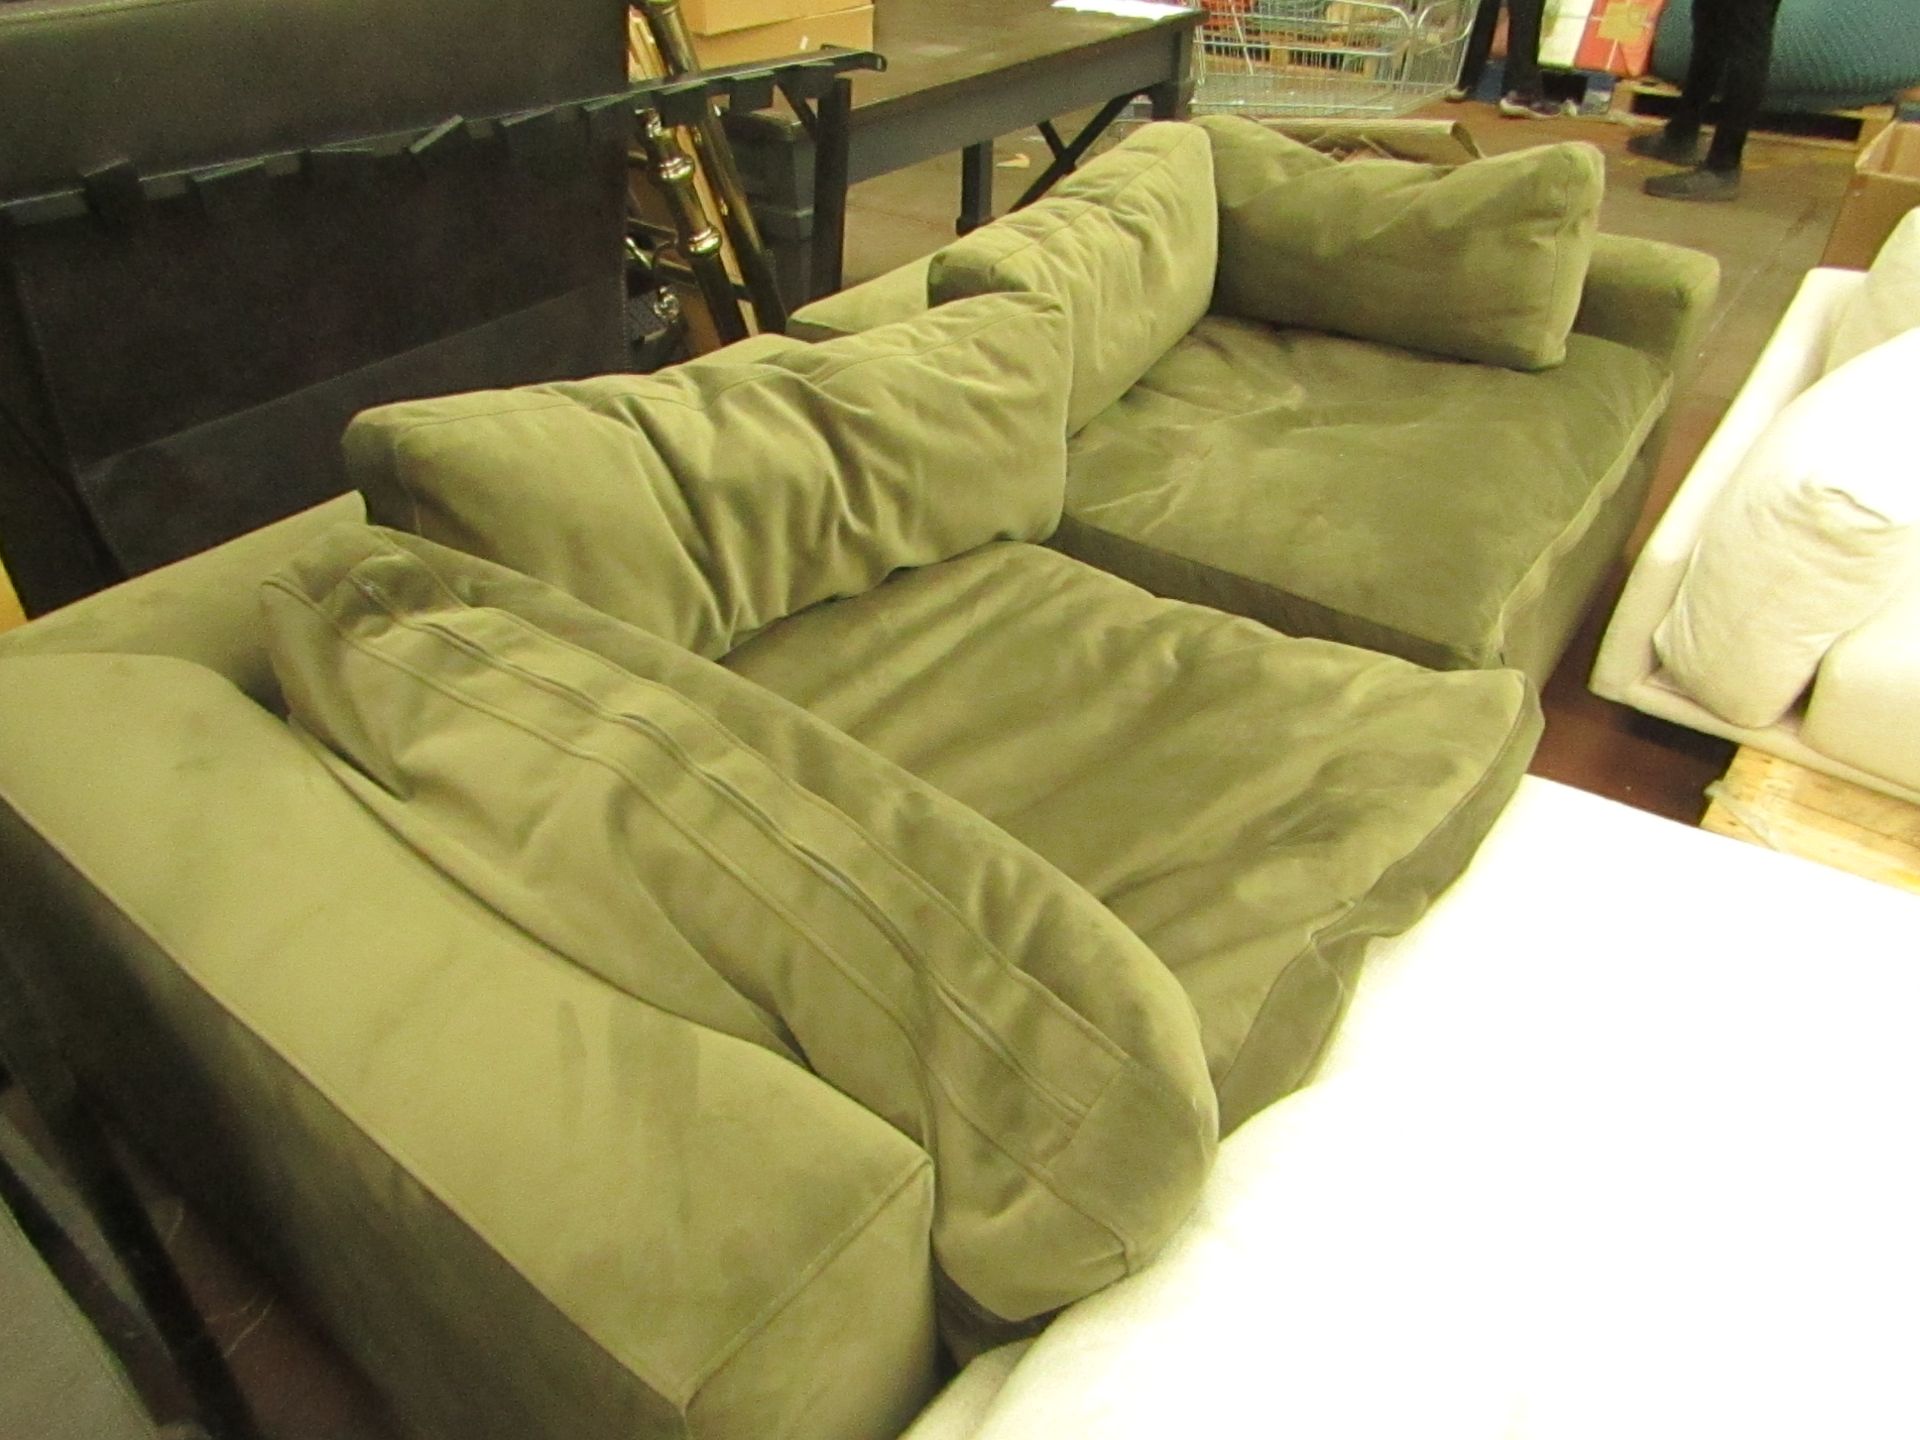 | 1X | MADE.COM 3 SEATER SOFA GREEN VELVET | ITEM IS MISSING ONE PART BUT THE OTHER TWO FORM A THREE